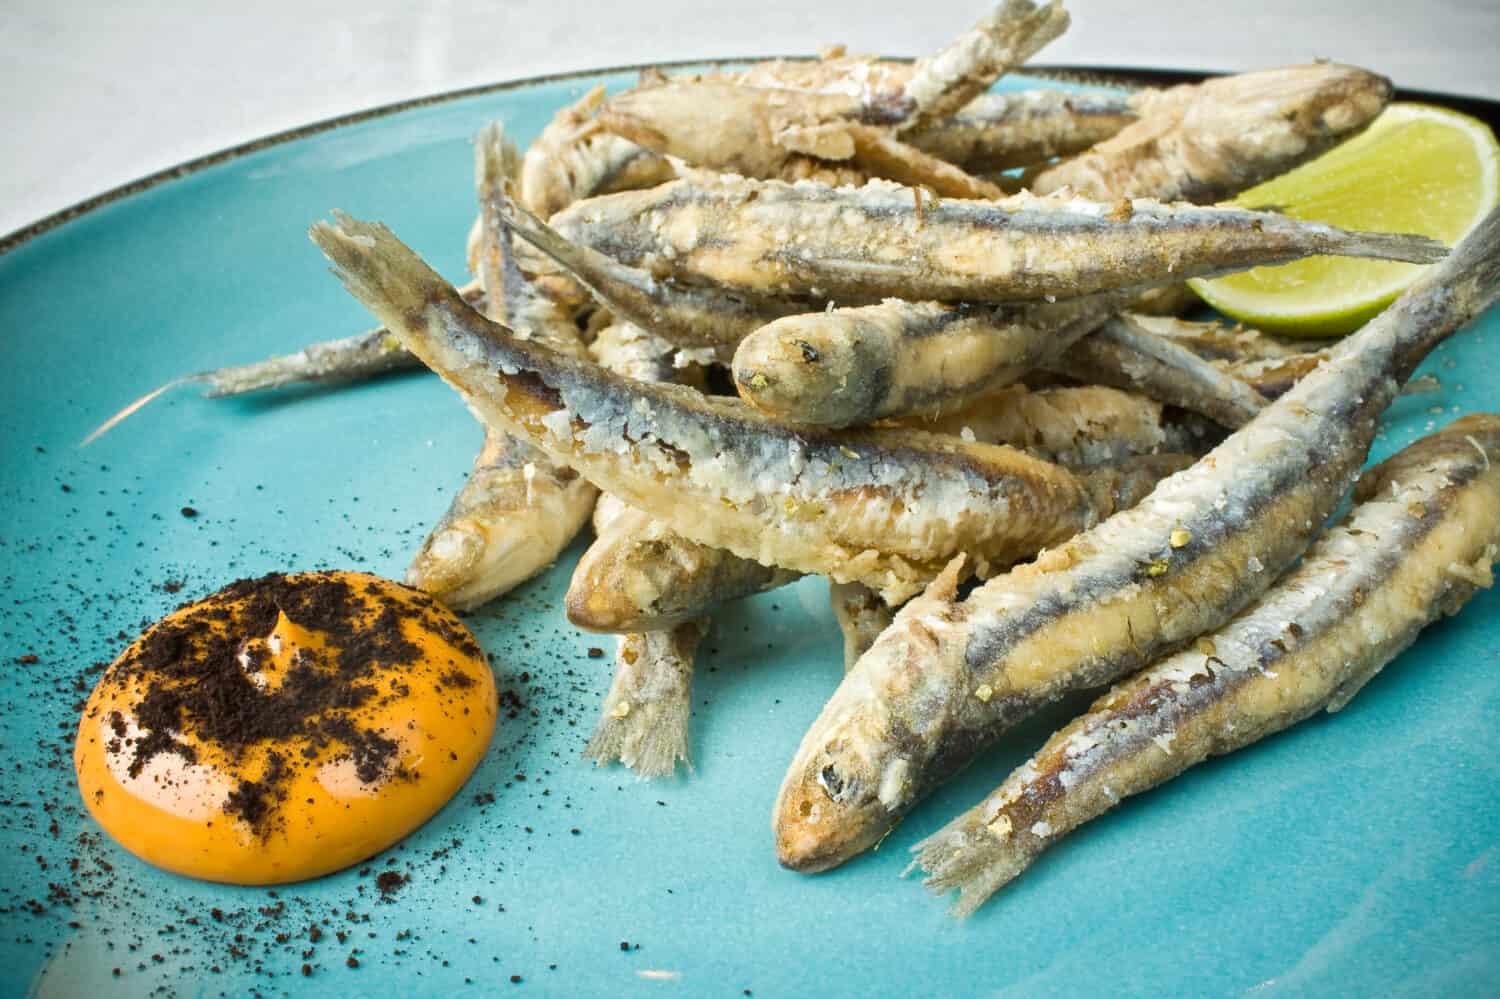 Mexican fried anchovies from Patzcuaro